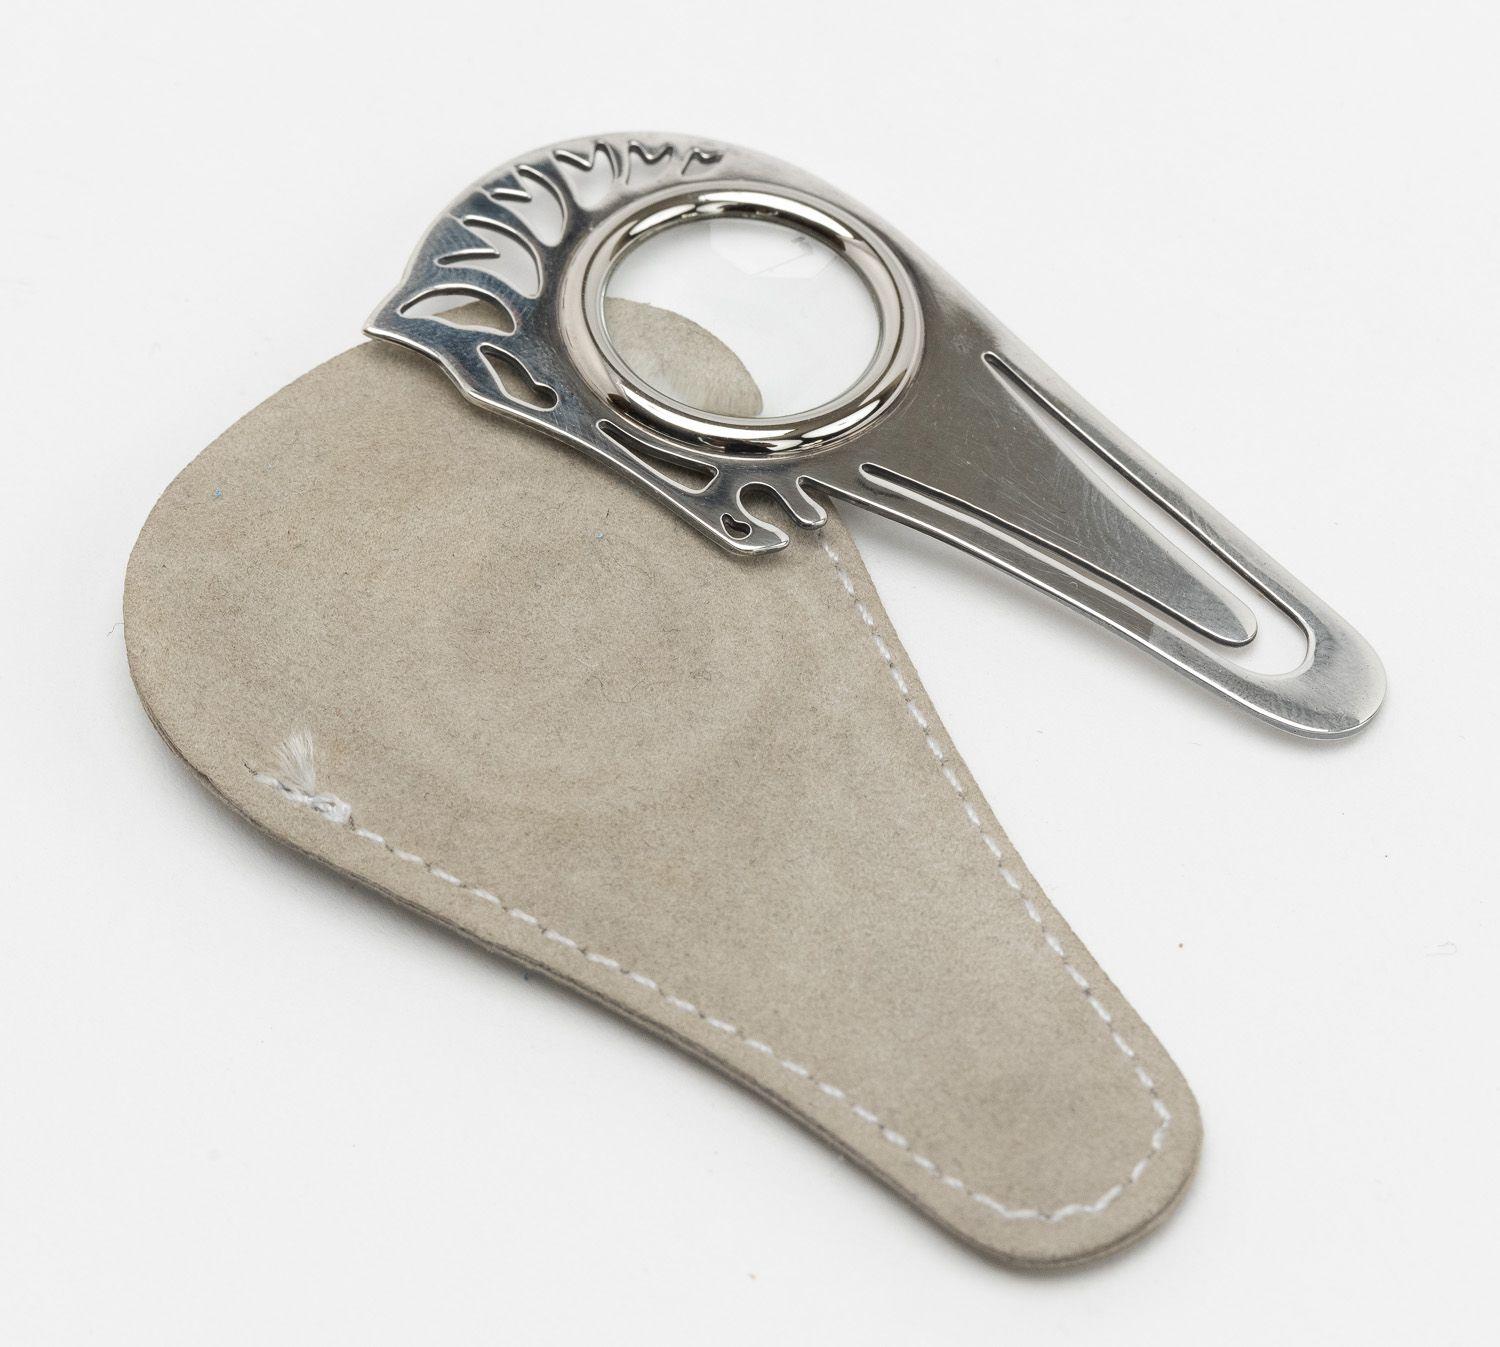 Hermes Magnifying Glass/Bookmark Horse shaped, palladium metal with glass. Comes with original suede cover.